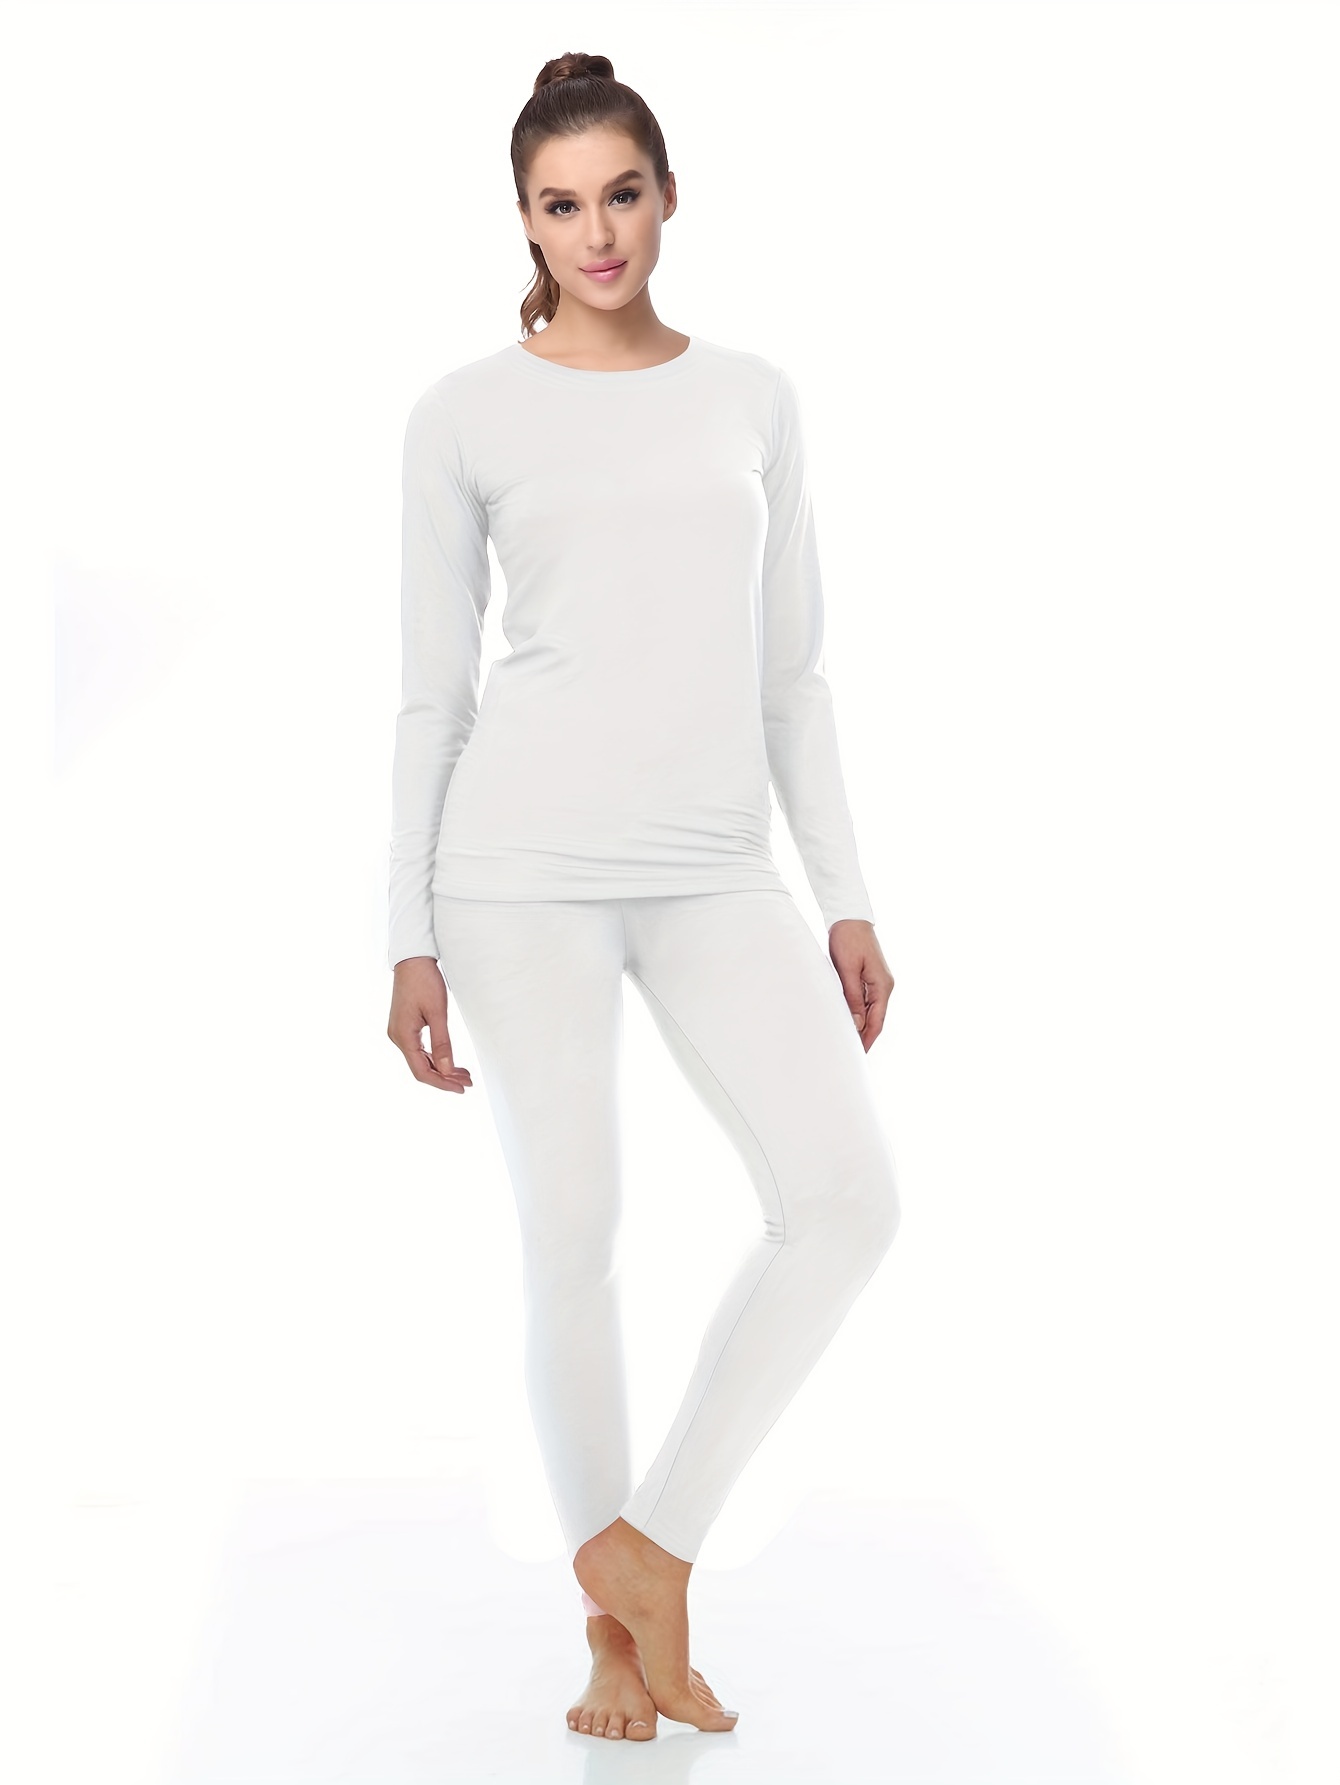 Buy Thermal Underwear for Women Long Johns for Women, Base Layer